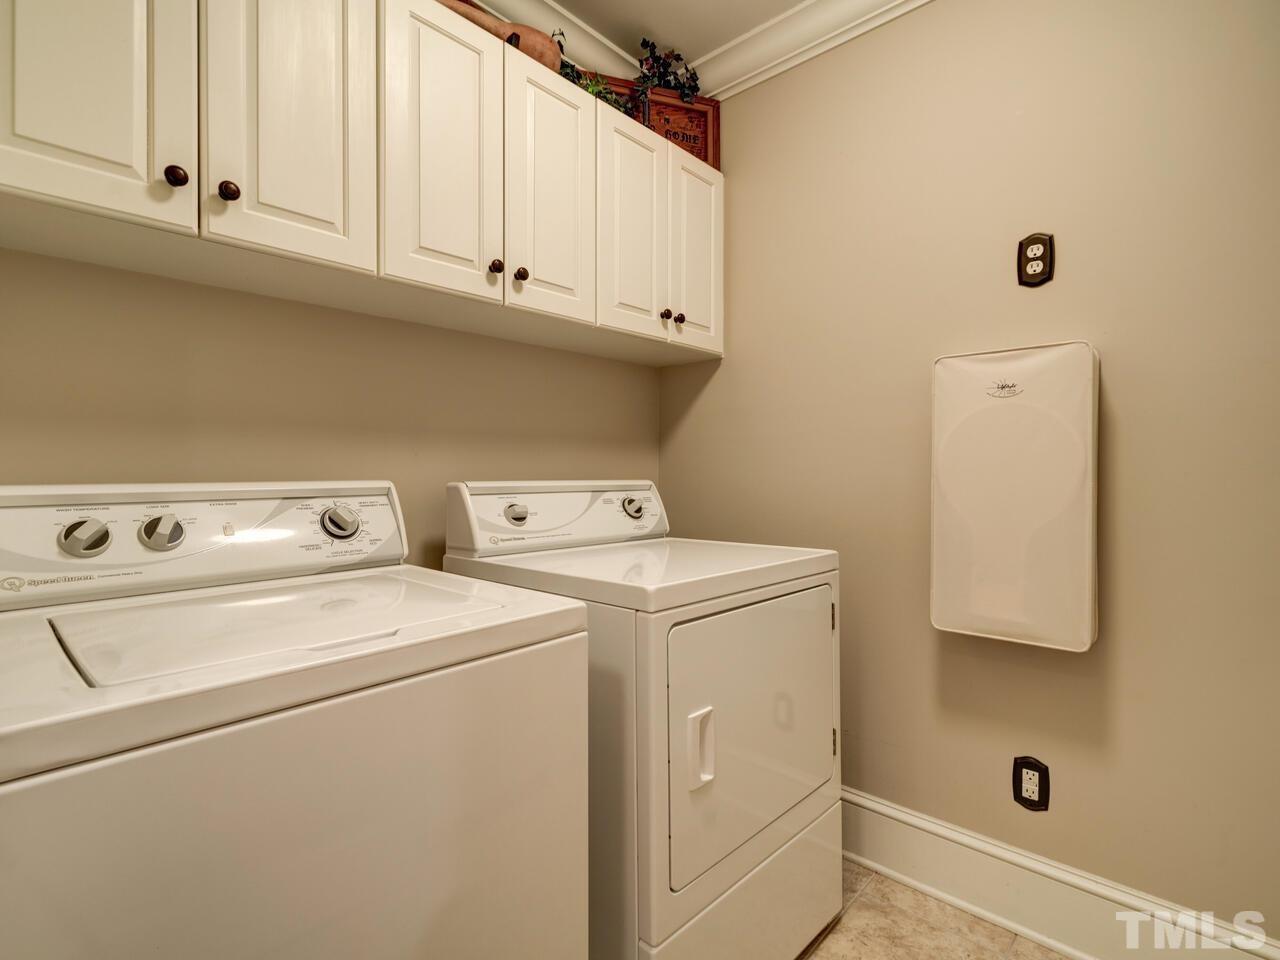 This washer/dryer will NOT convey.  There is also a laundry area in the basement.